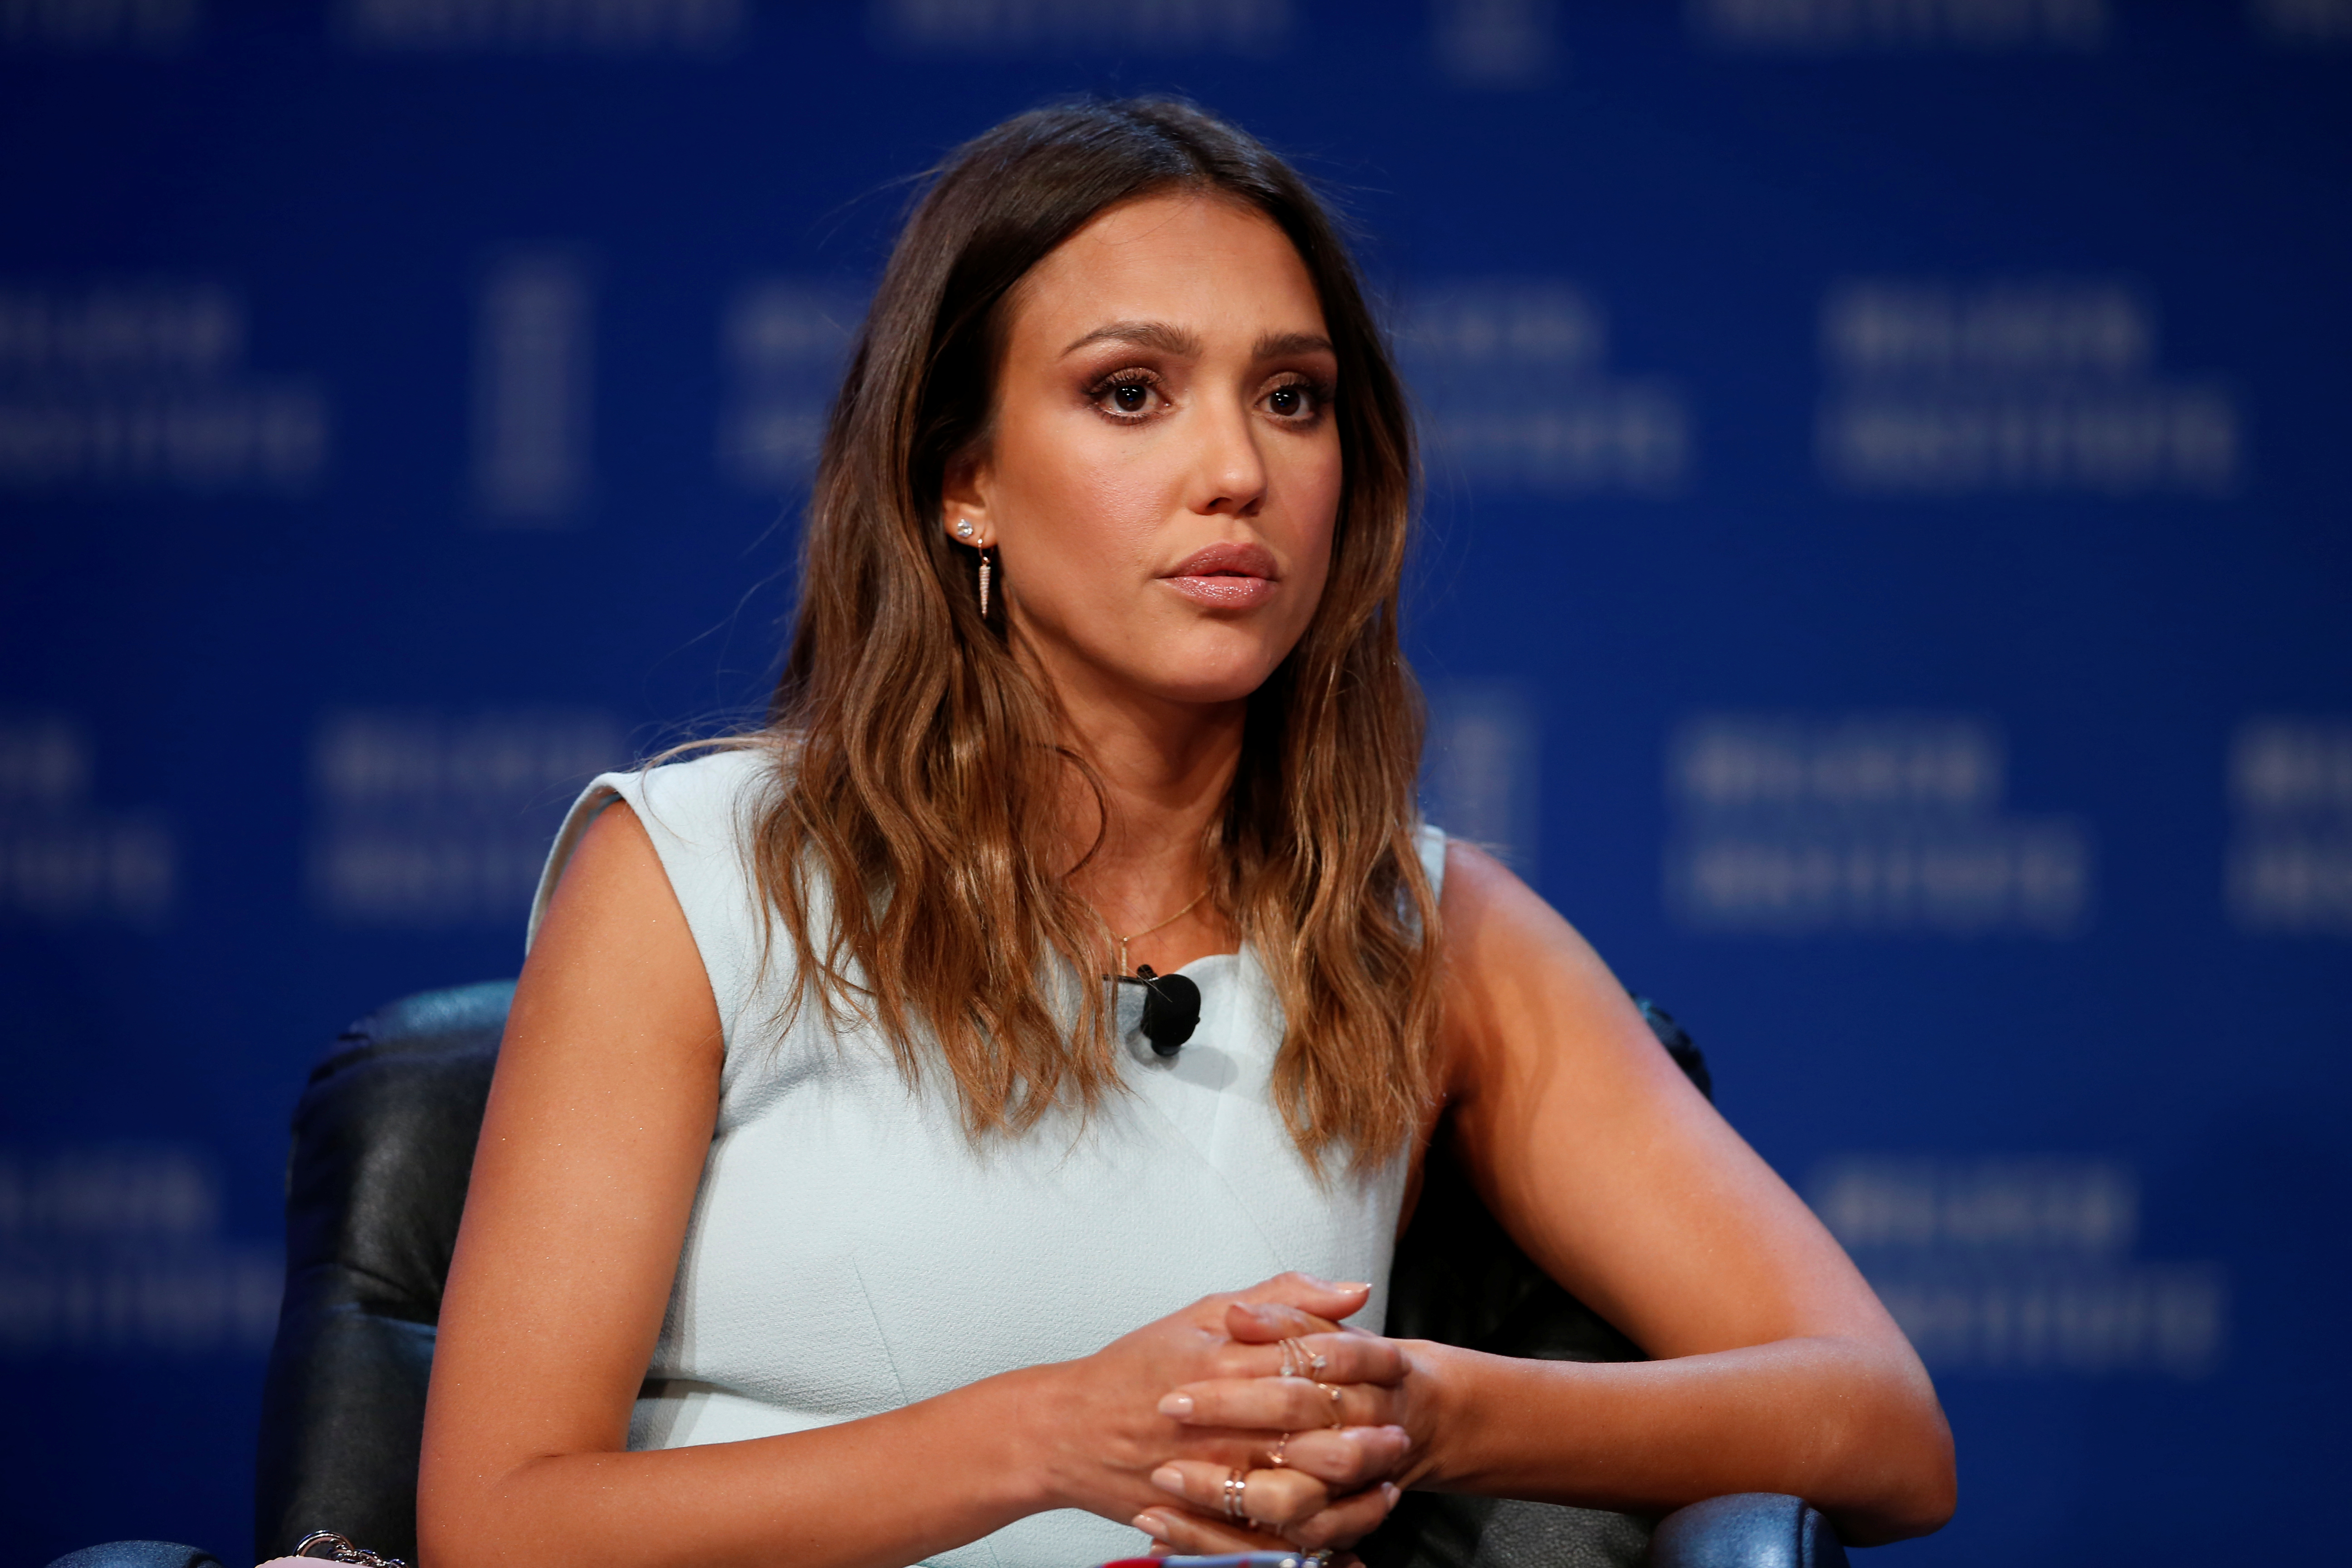 Jessica Alba, Founder and Chief Creative Officer of The Honest Company, speaks at the Milken Institute Global Conference in Beverly Hills